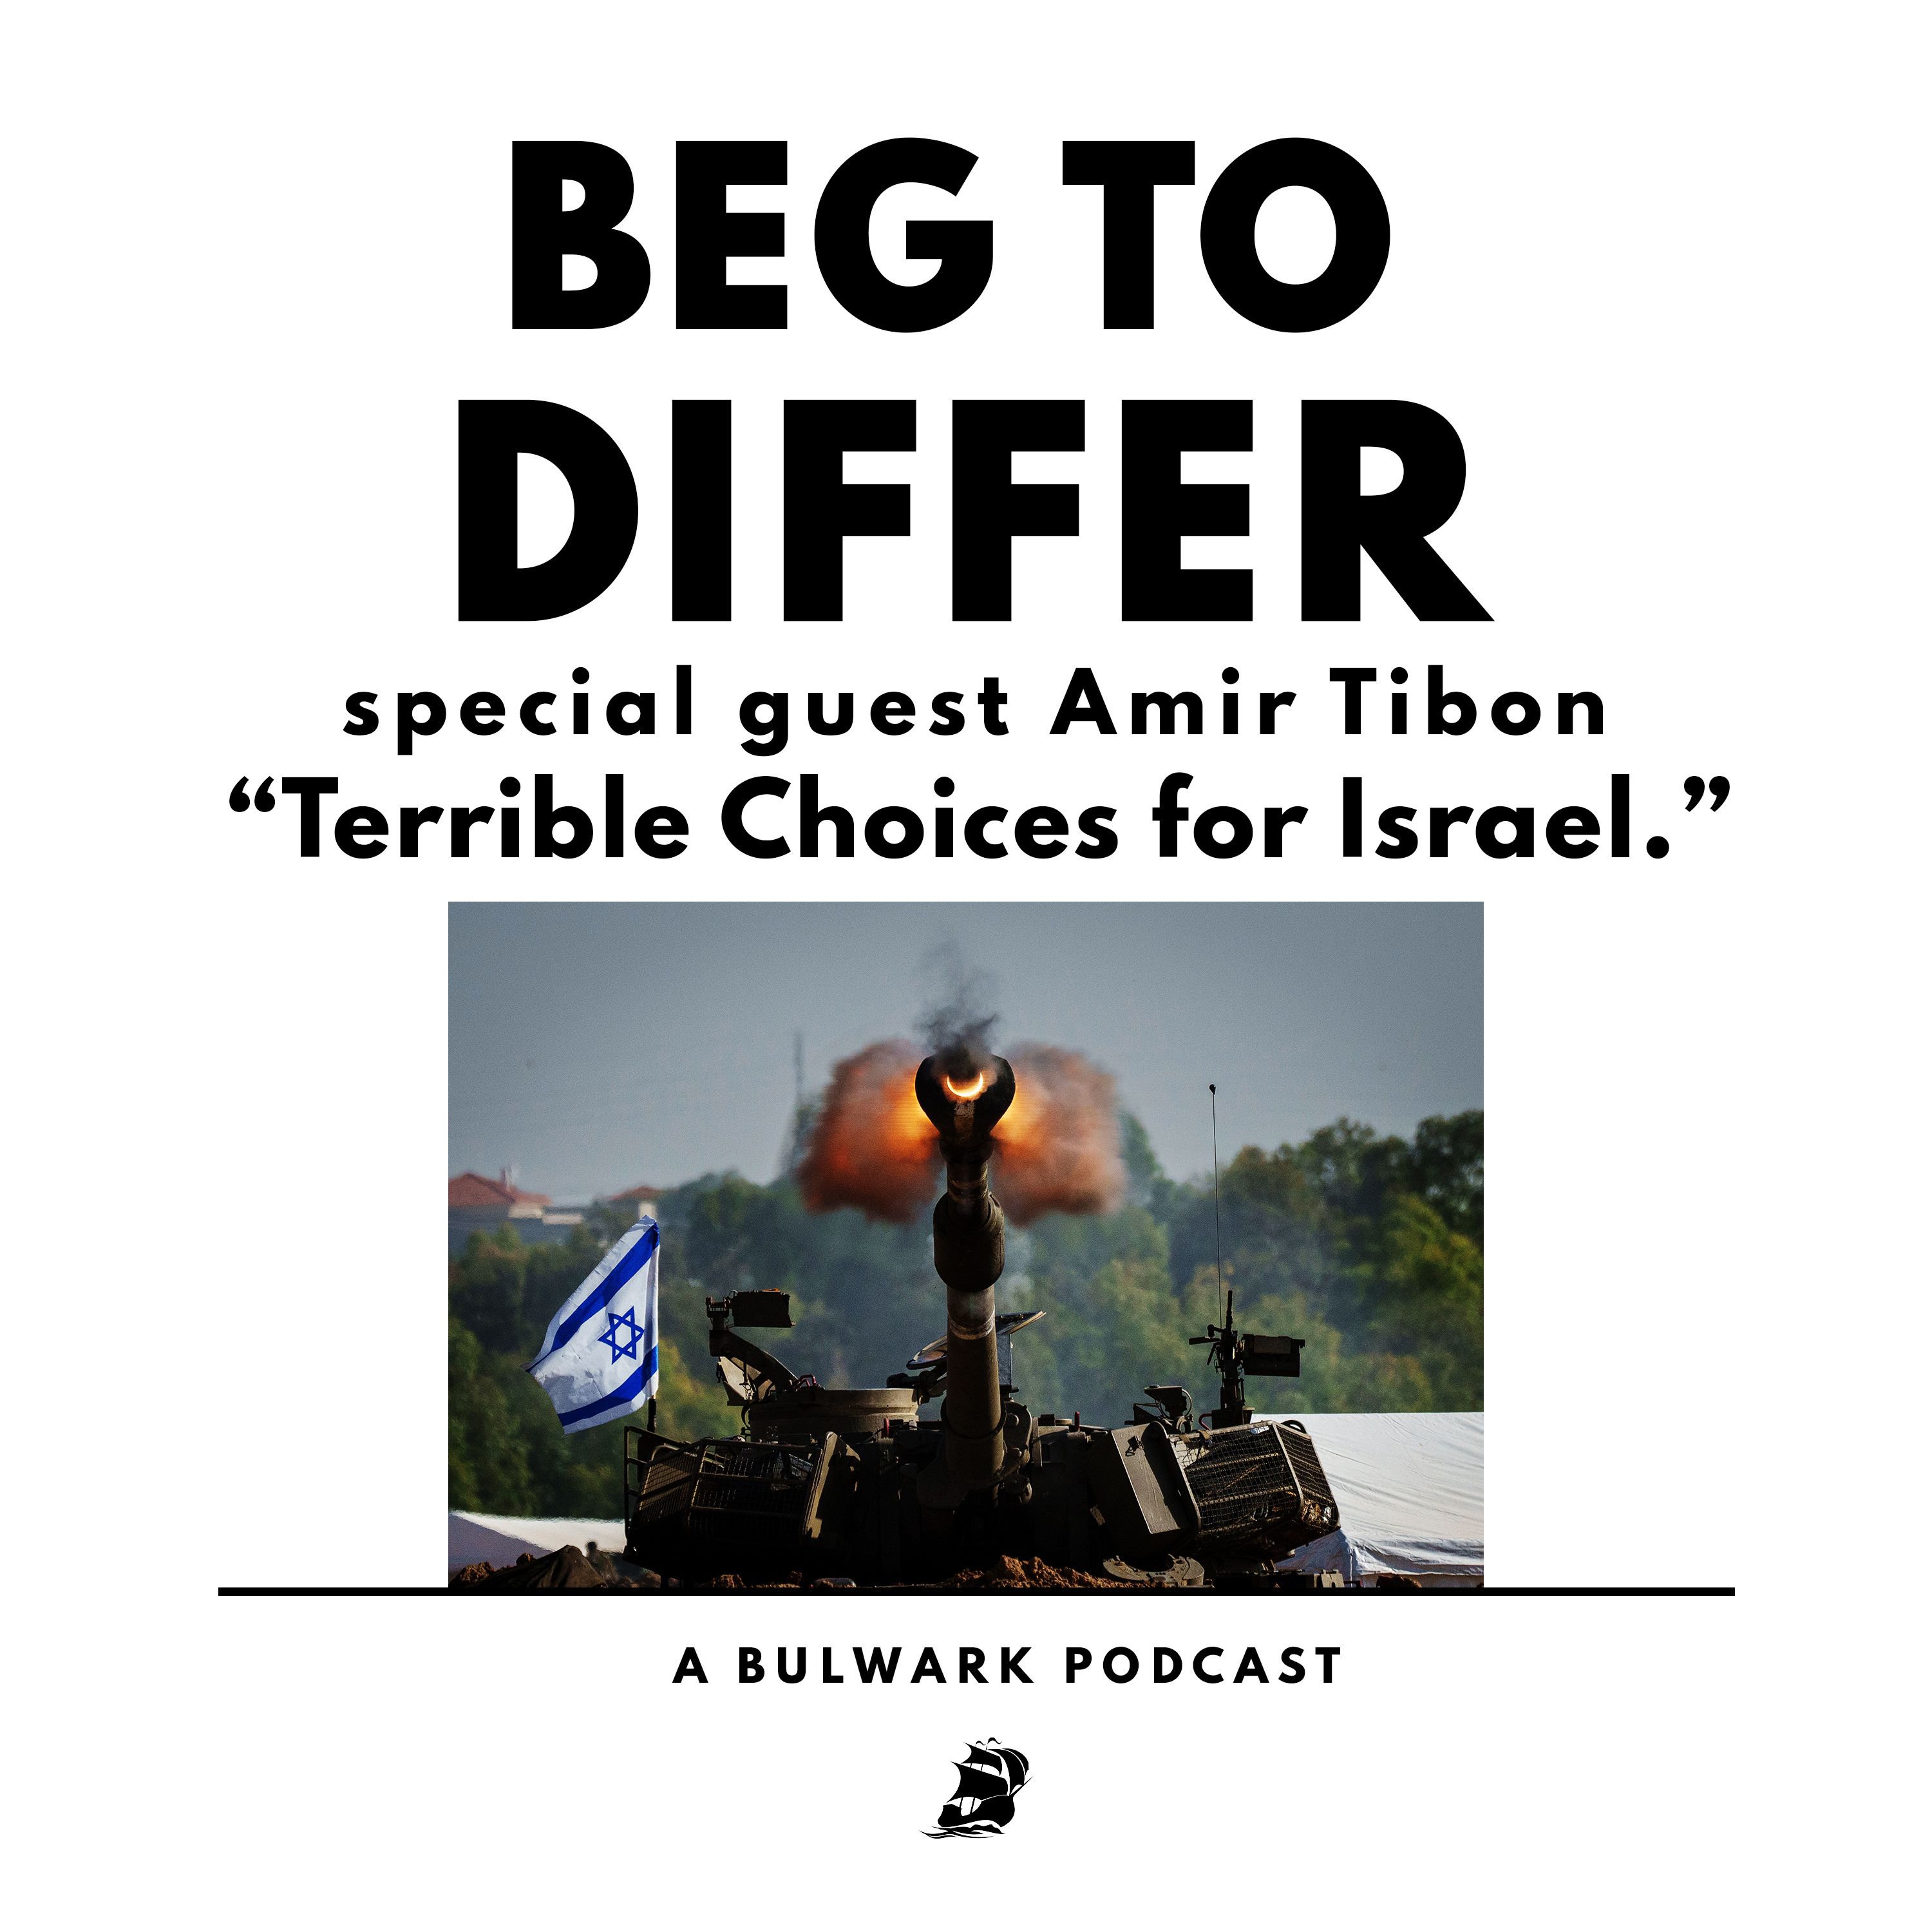 ”Terrible Choices for Israel”